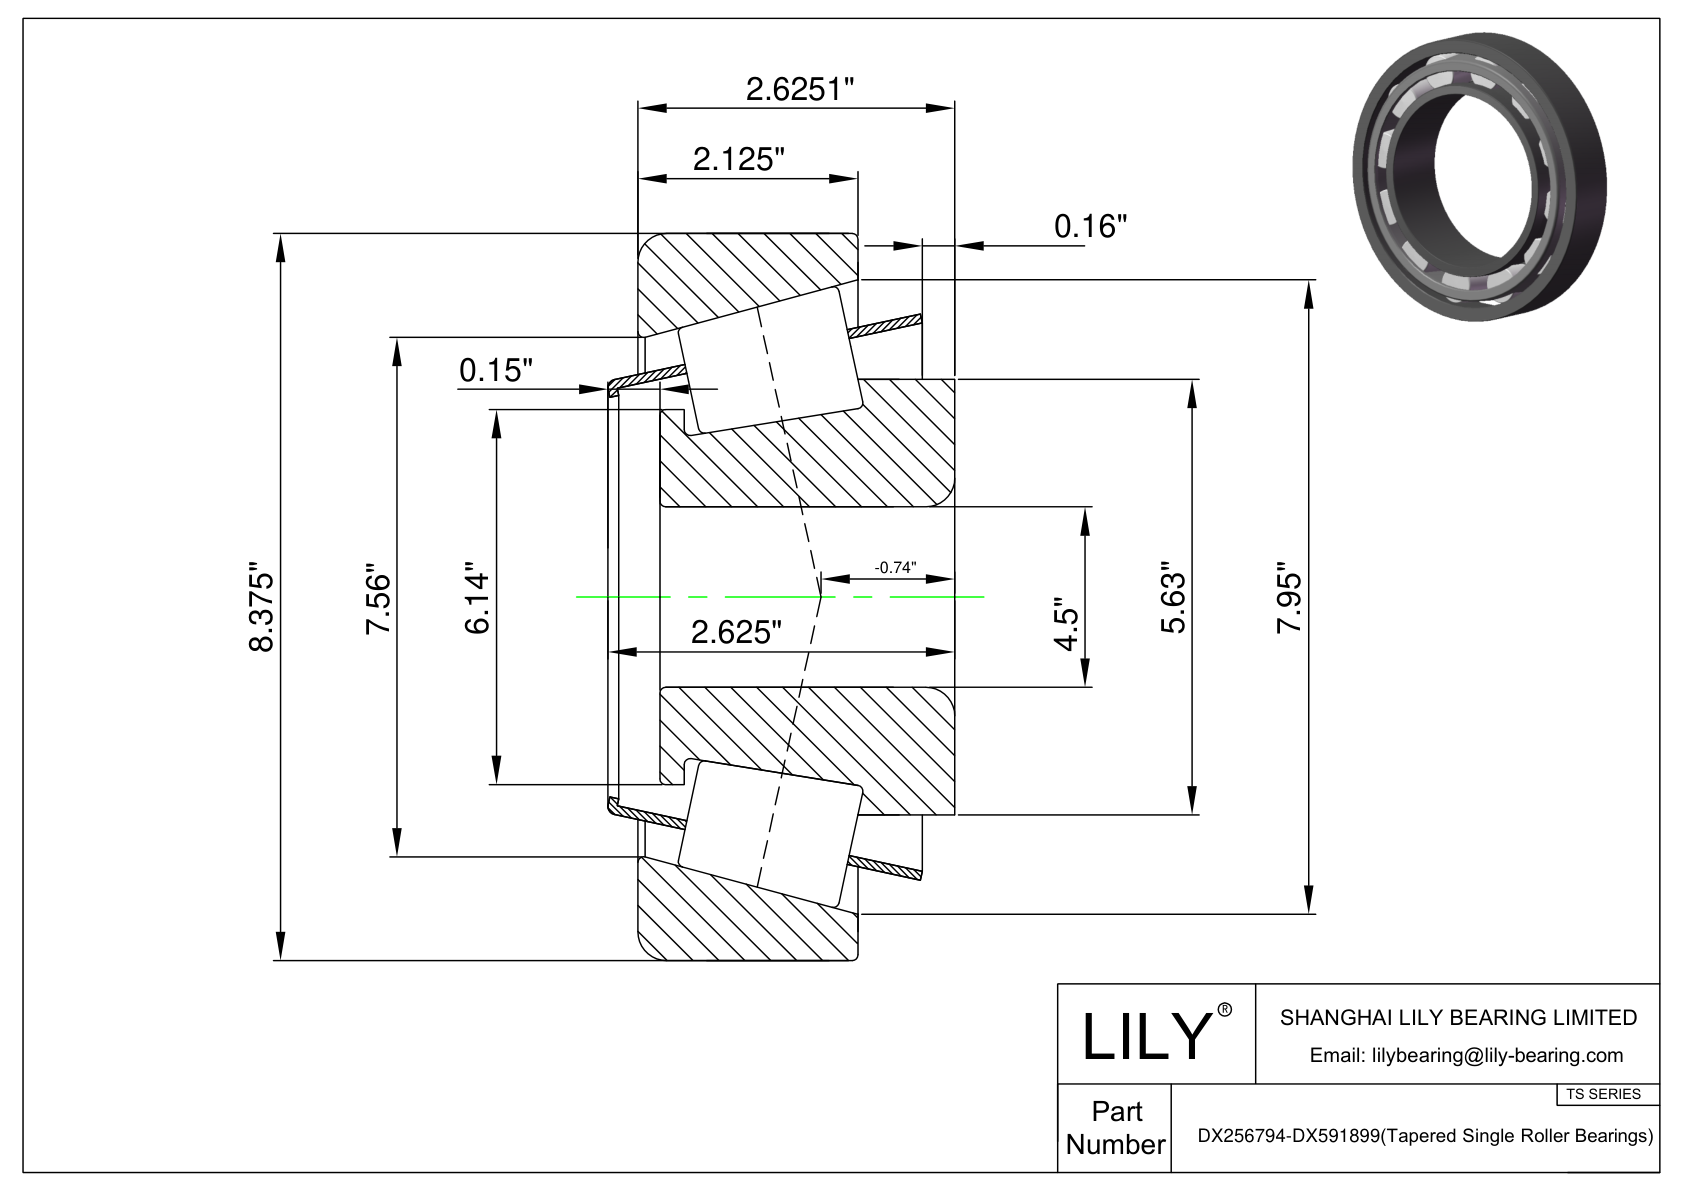 DX256794-DX591899 TS (Tapered Single Roller Bearings) (Imperial) cad drawing